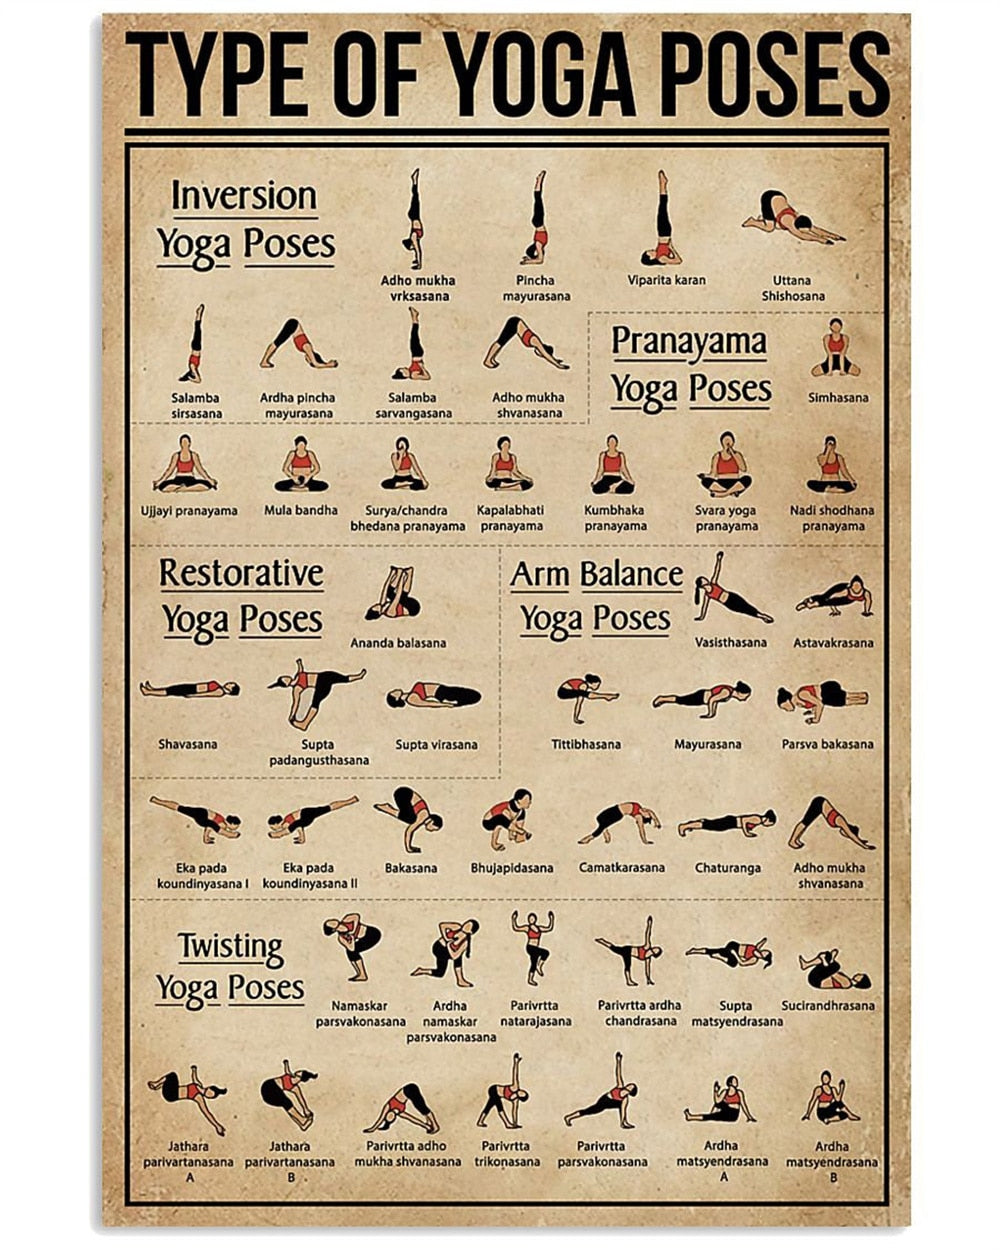 7 Chakras Knowledge Poster Yoga Chakra Awakening Vintage Print Knowledge Canvas Painting Modern Wall Art Pictures Home Decor - 20X30cm no frame / TP492-1 - 30X40cm no frame / TP492-1 - 40X60cm no frame / TP492-1 - 50X70cm no frame / TP492-1 - 60X90cm no frame / TP492-1 - 40X50cm no frame / TP492-1 - 20X30cm with Frame / TP492-1 - 30X40cm with Frame / TP492-1 - 40X60cmX DIY Frame / TP492-1 - 50X70cmX DIY Frame / TP492-1 - 60X90cmX DIY Frame / TP492-1